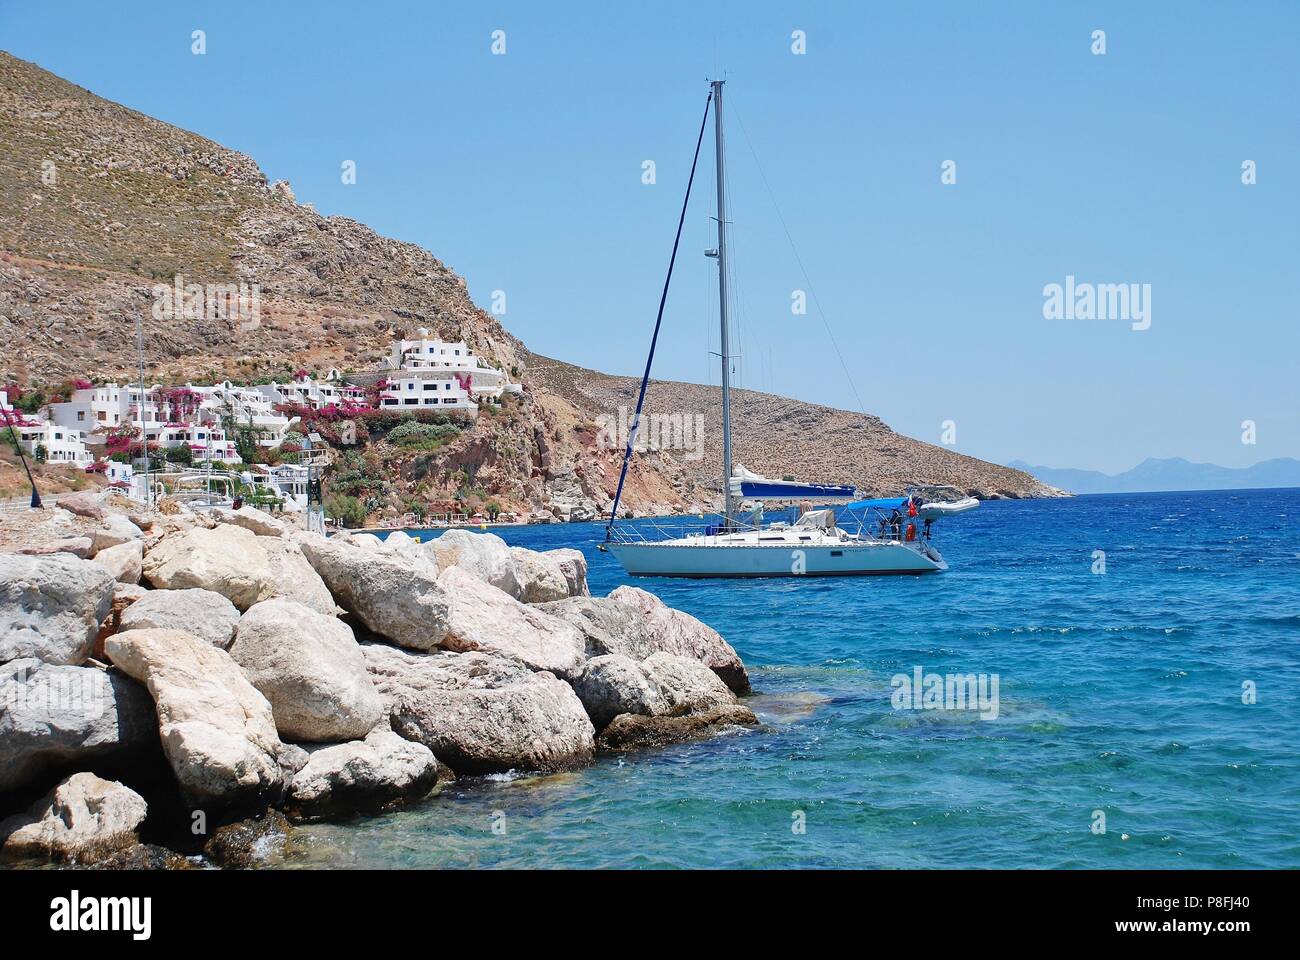 A yacht enters Livadia harbour on the Greek island of Tilos on June 12, 2018. Stock Photo